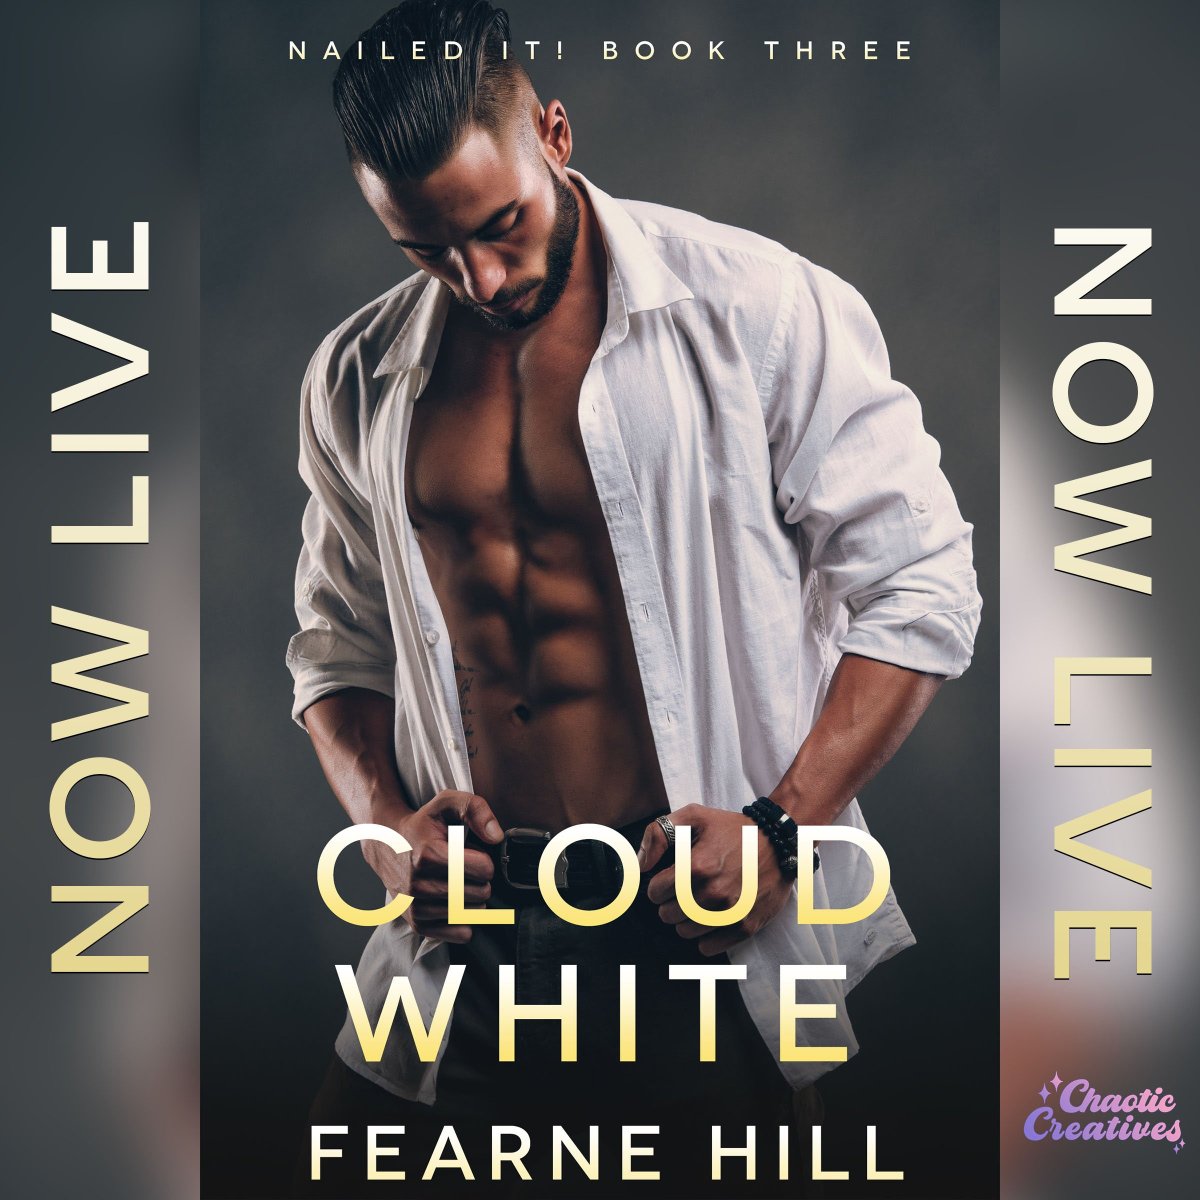 #NewRelease Cloud White, the next book in the Nailed it! Series by Fearne Hill is LIVE!

#1ClickNow: geni.us/cloudwhiteeven…

#MMRomance #FriendsToLovers #BritishHero @Chaotic_Creativ